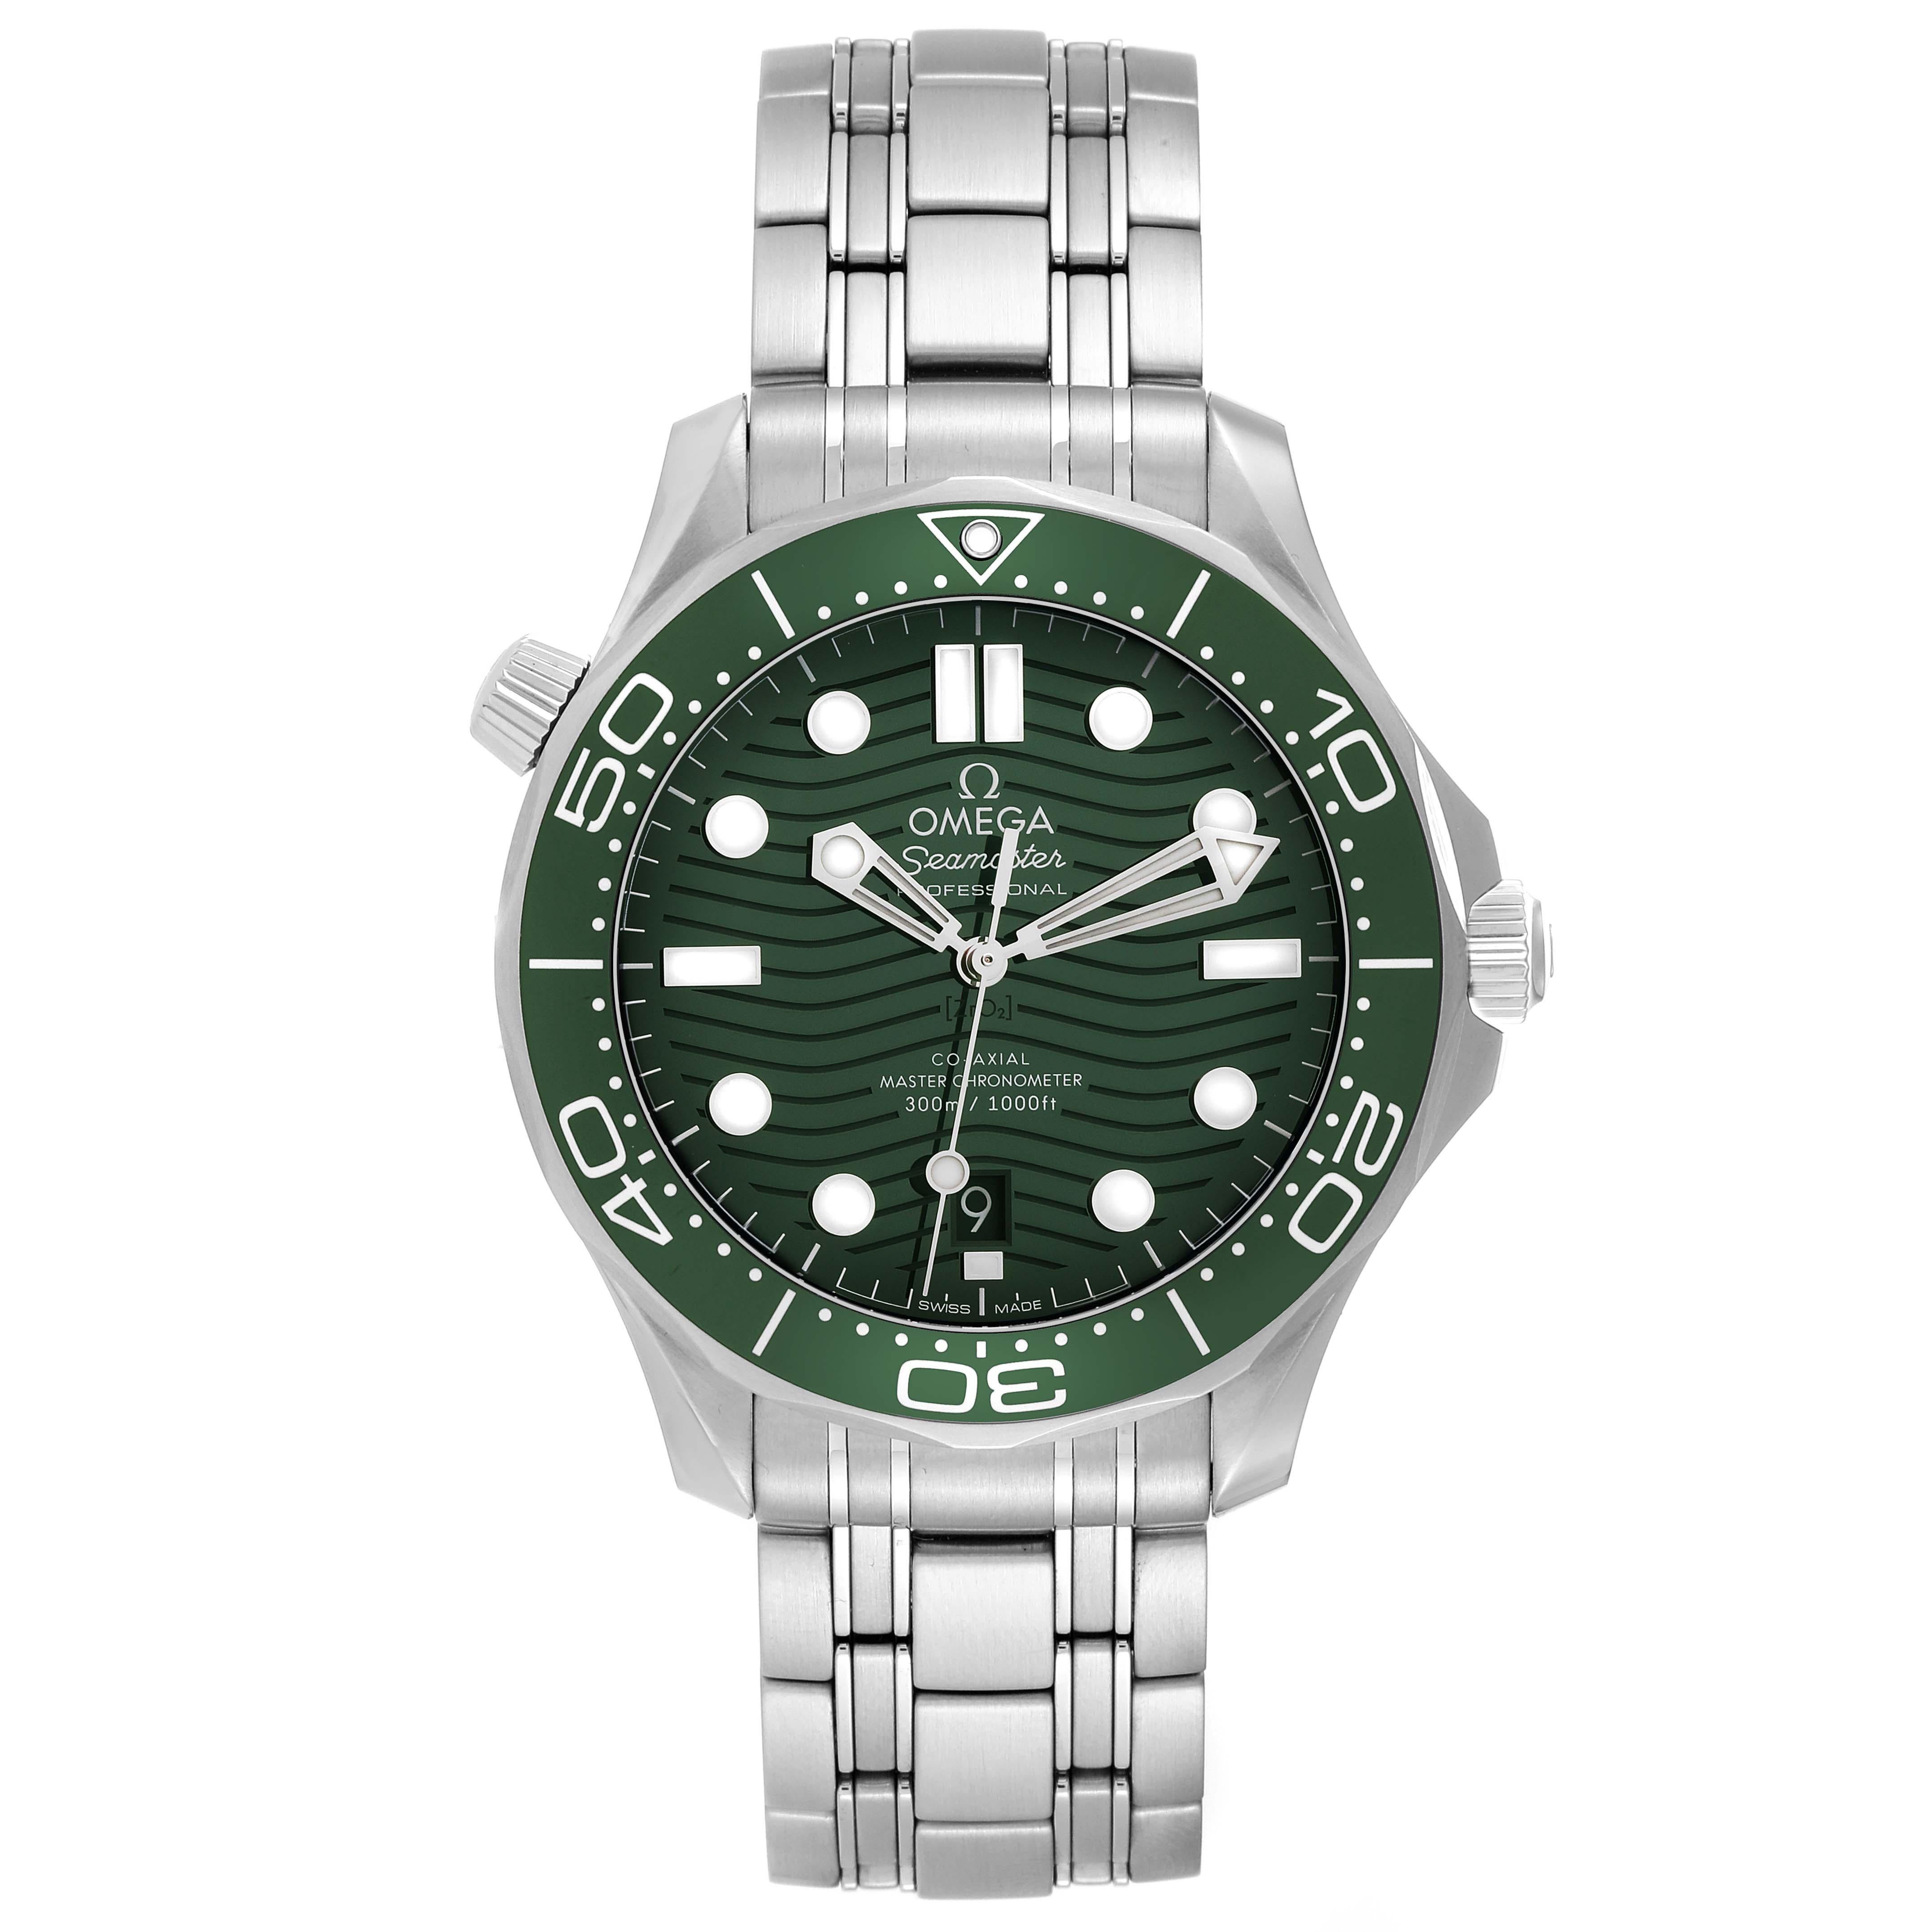 Men's Omega Seamaster Diver Green Dial Steel Mens Watch 210.30.42.20.10.001 Box Card For Sale